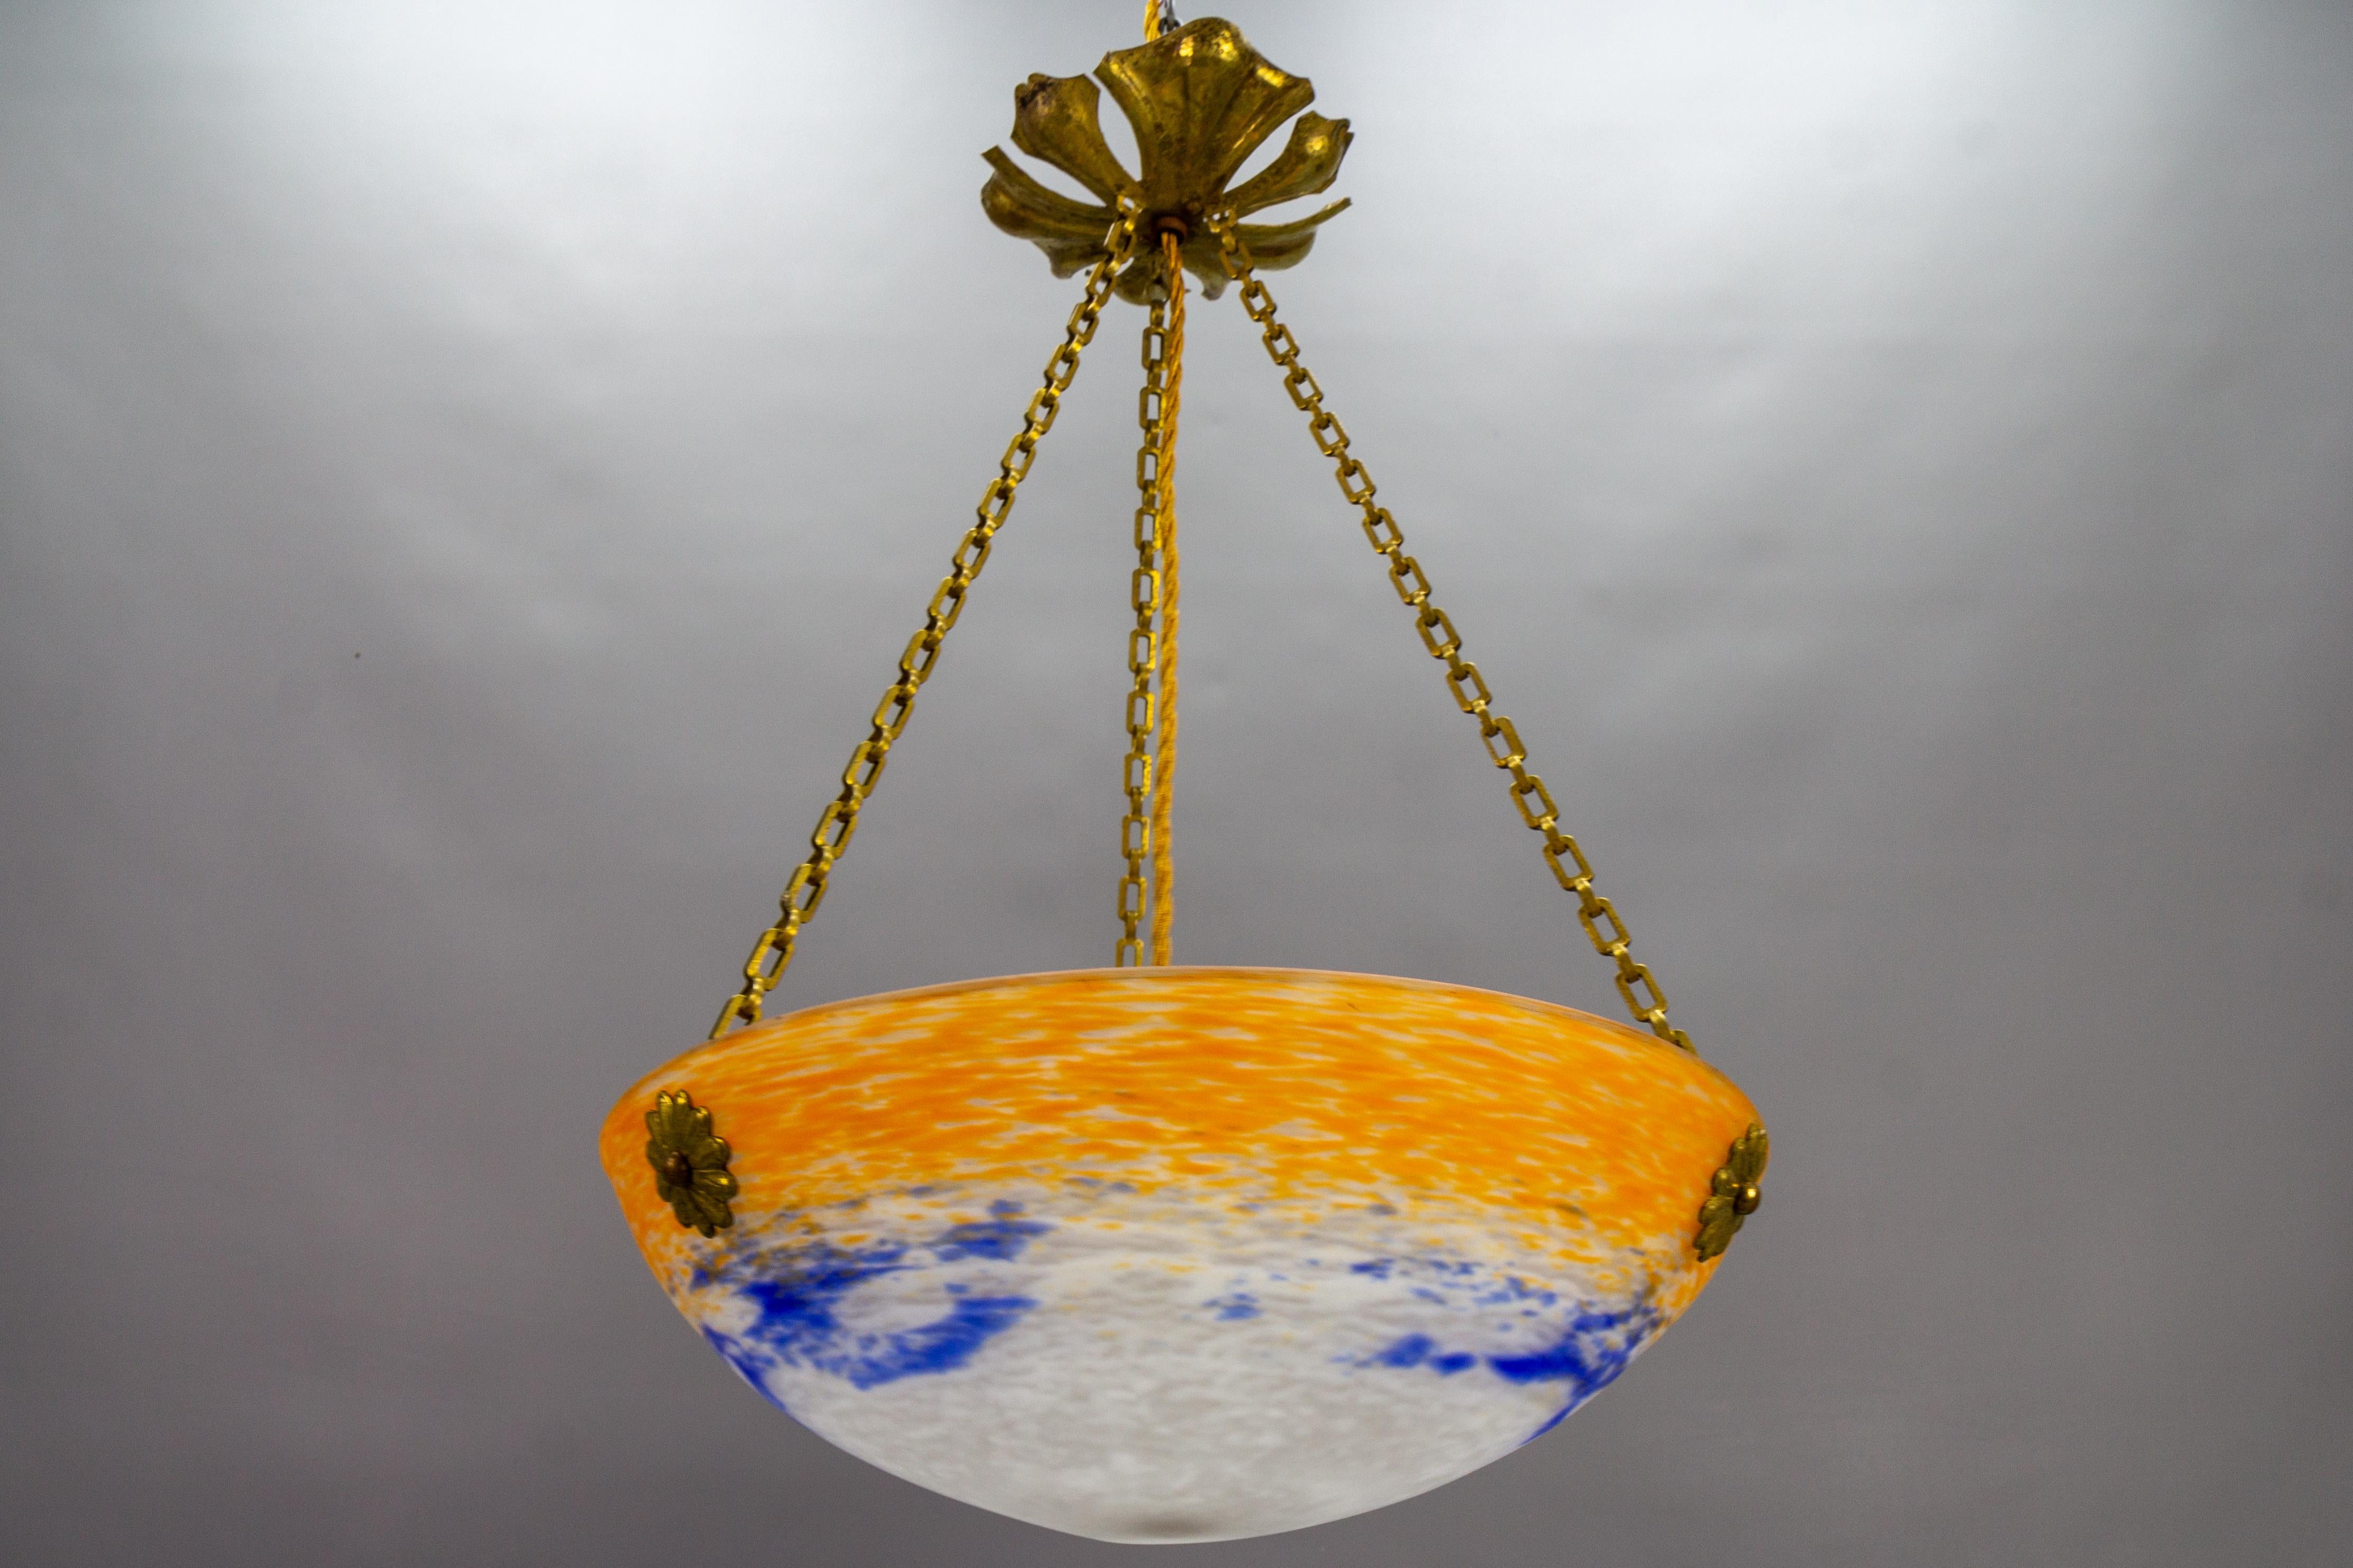 French Art Nouveau Orange, White and Blue Glass Pendant Light by Noverdy, 1920s For Sale 15